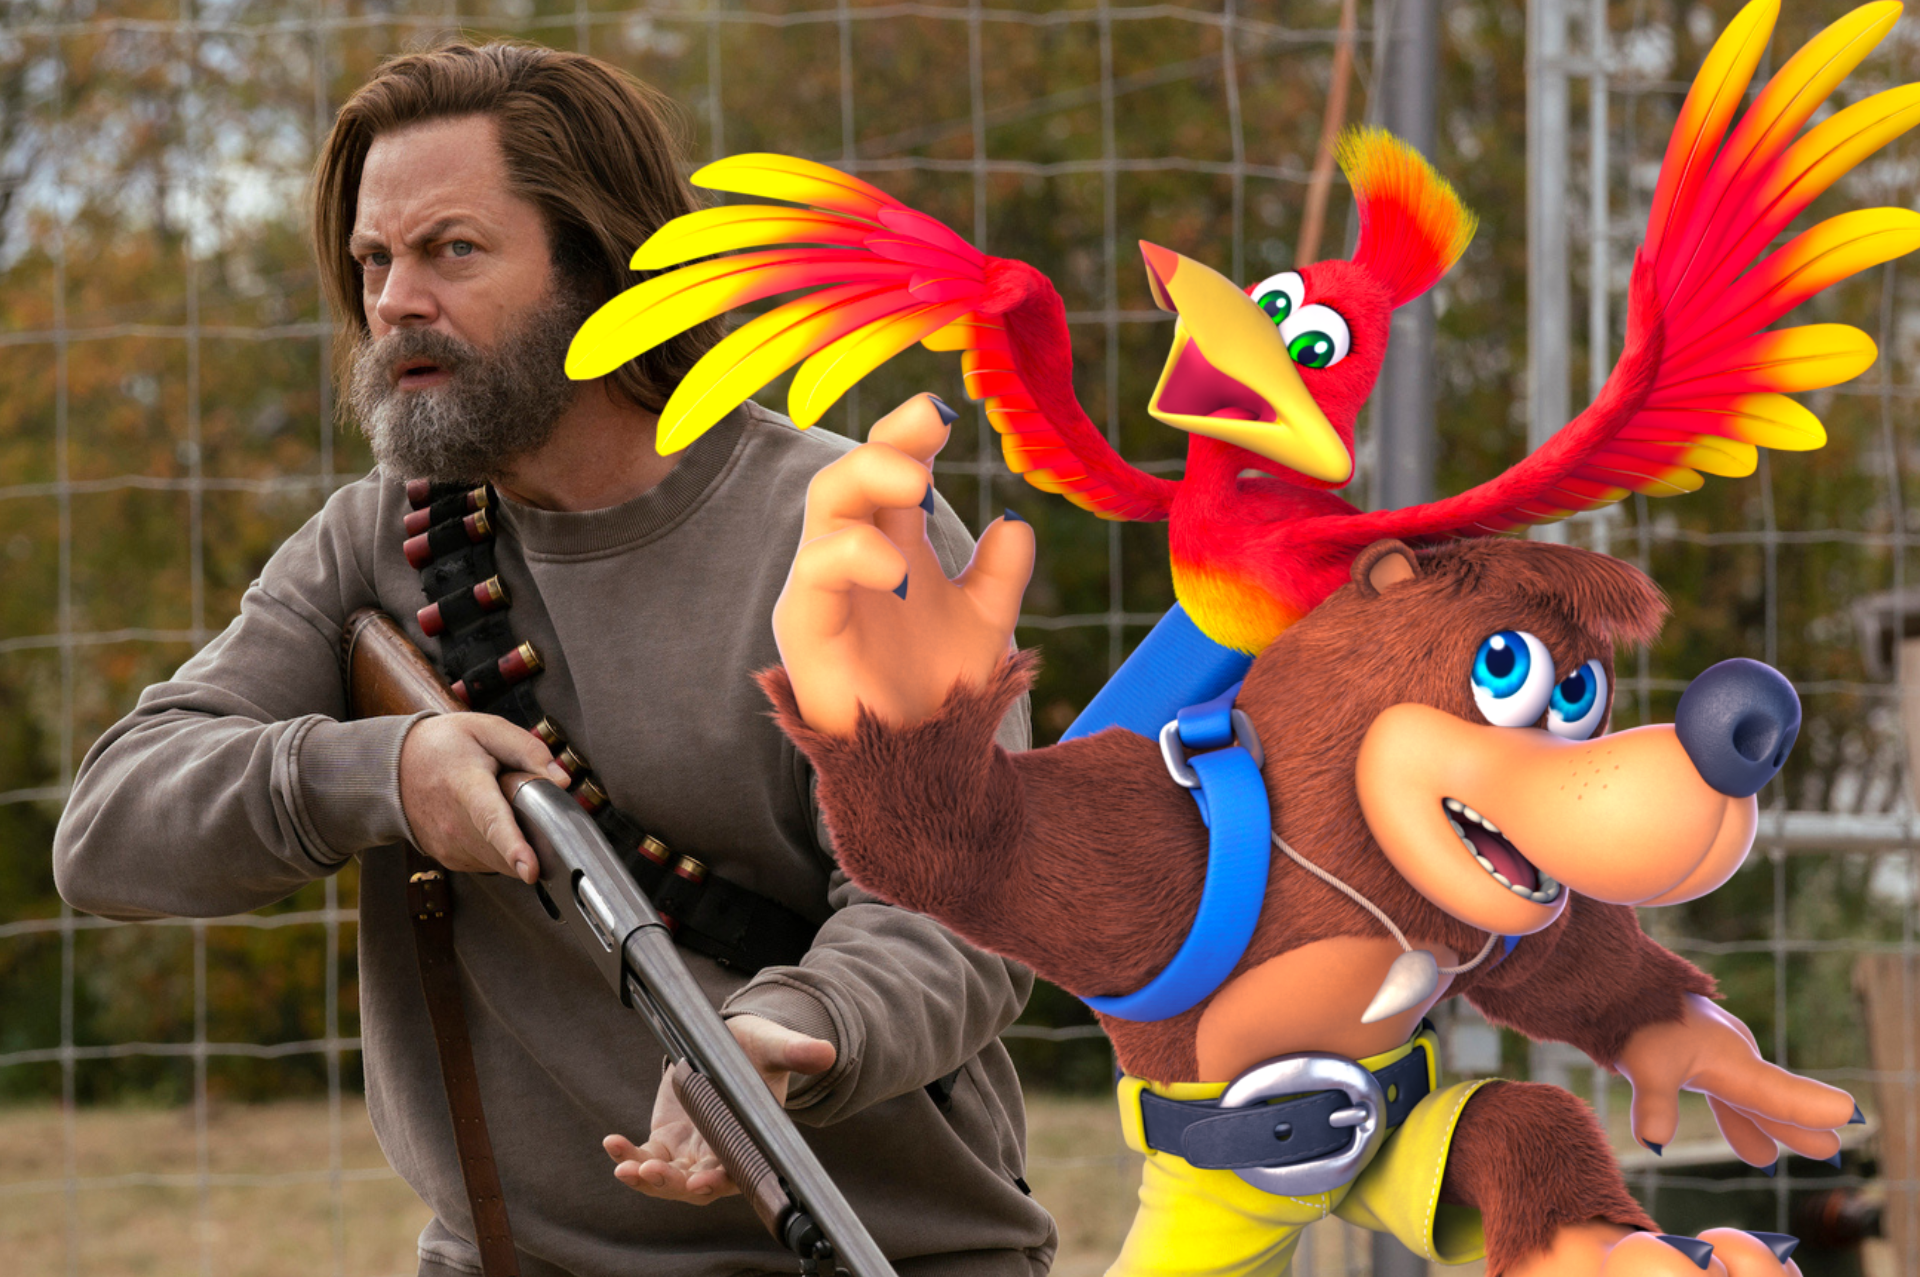 nick offerman as a gruff survivalist holding a rifle; next to him are the bear and bird of banjo-kazooie as seen in super smash bros ultimate